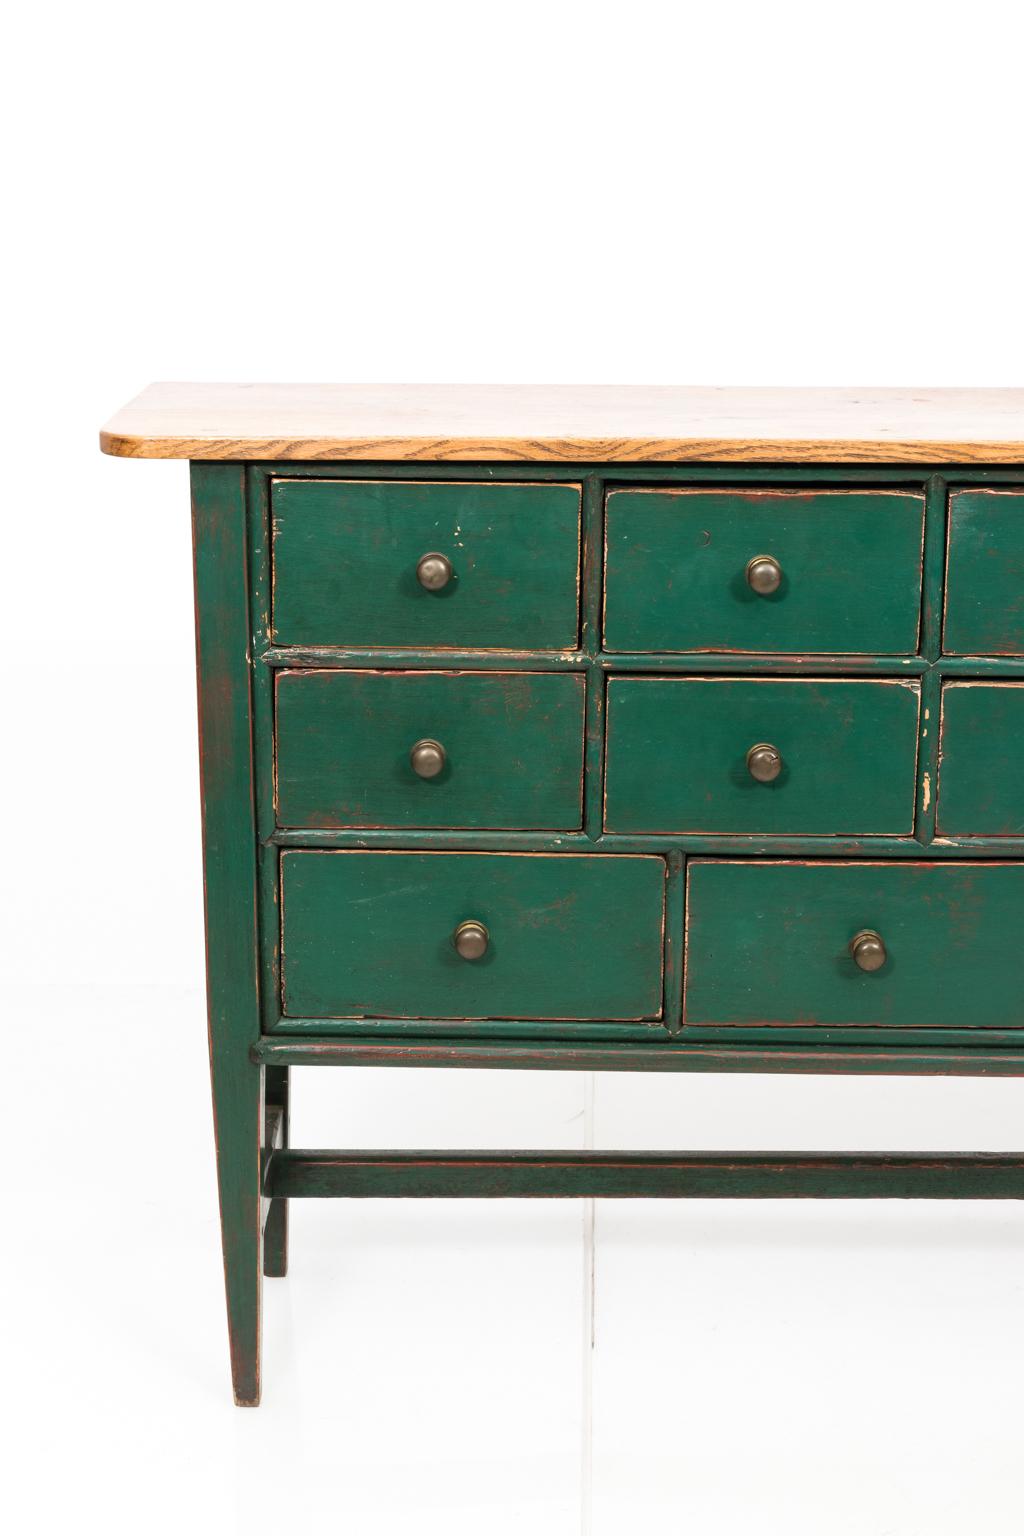 Late 20th Century Green Painted English Sideboard, circa 1990s